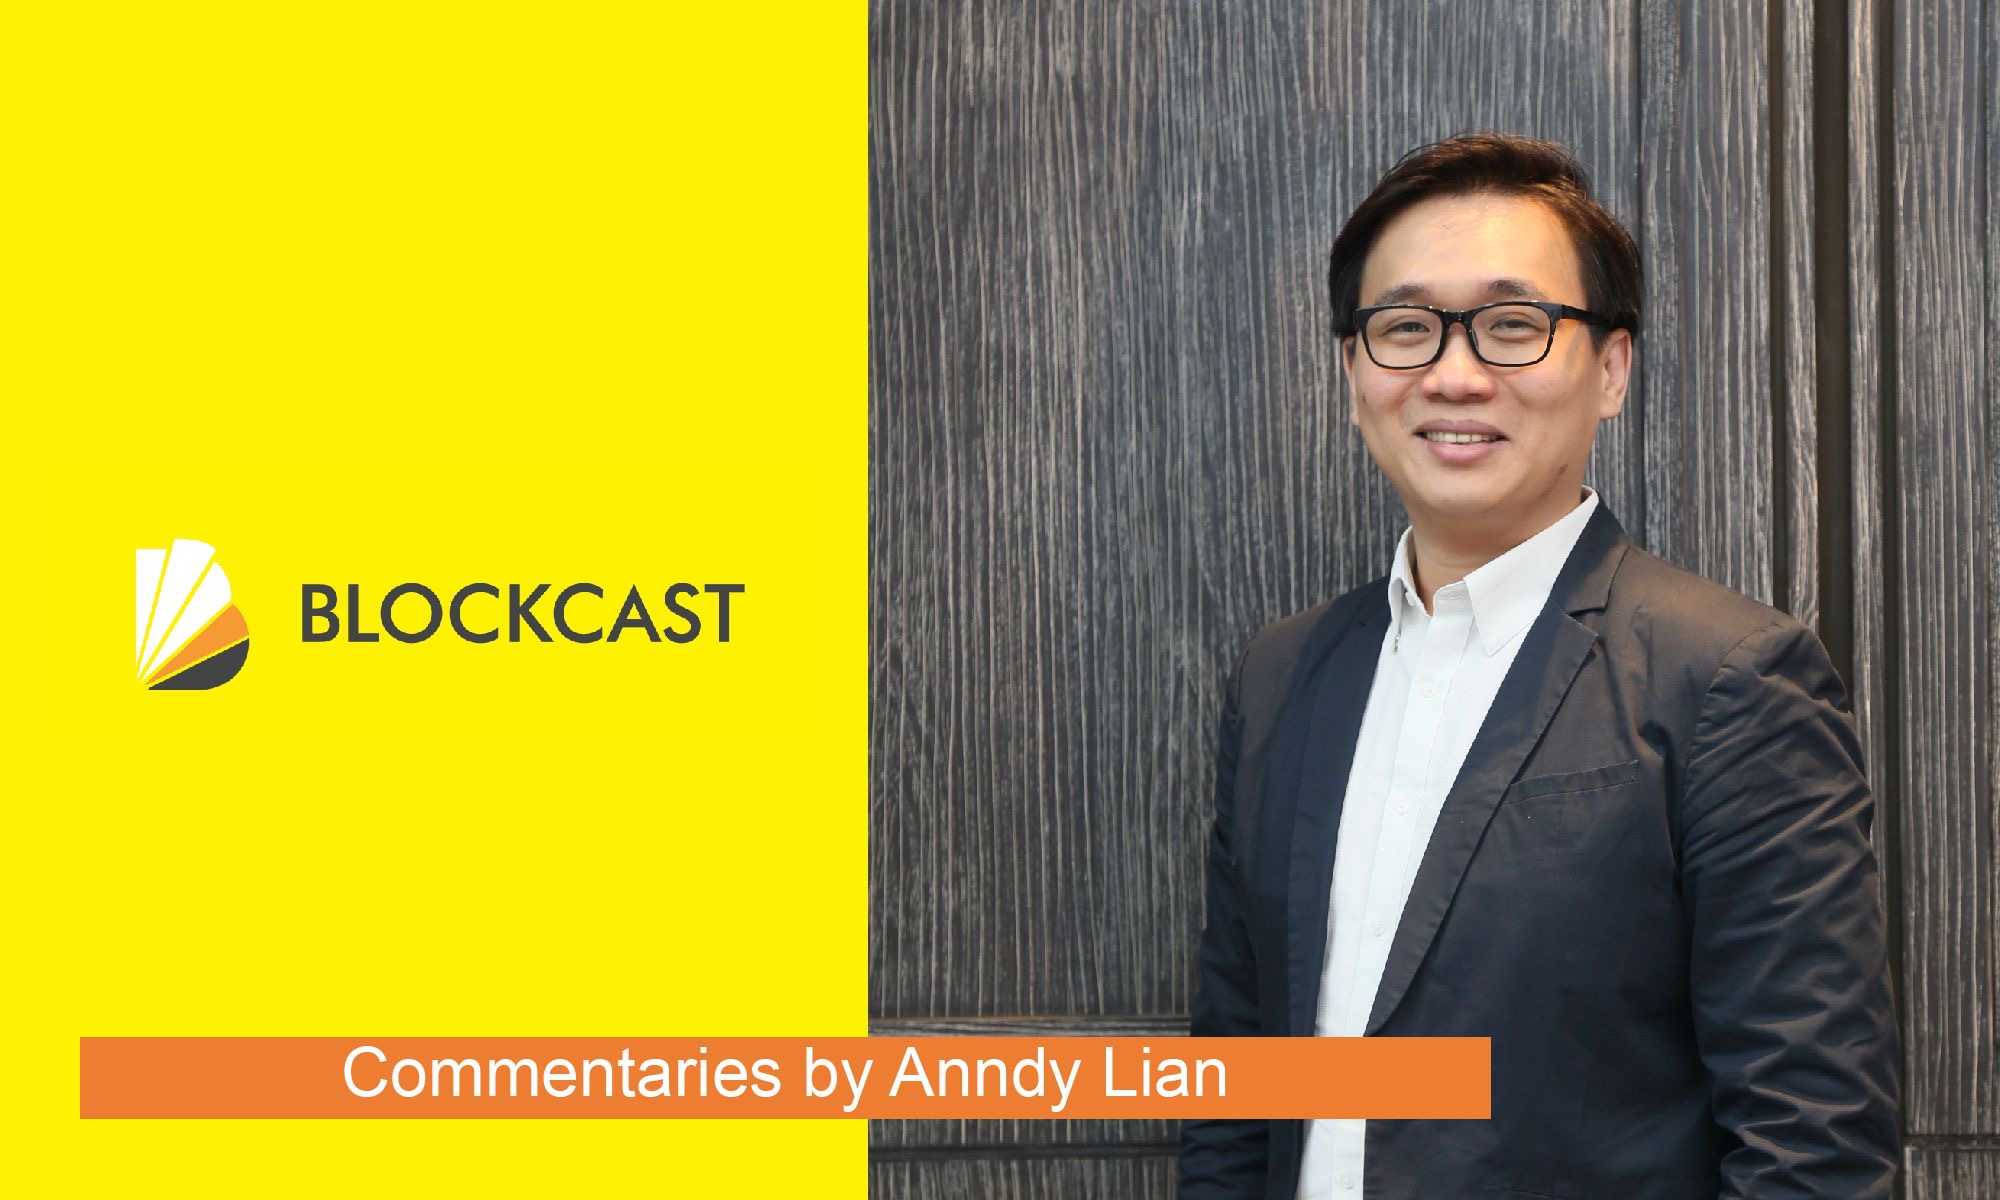 Commentaries by Anndy Lian “New Global Standards Come with the Marriage of Binance & Coinmarketcap.jpg